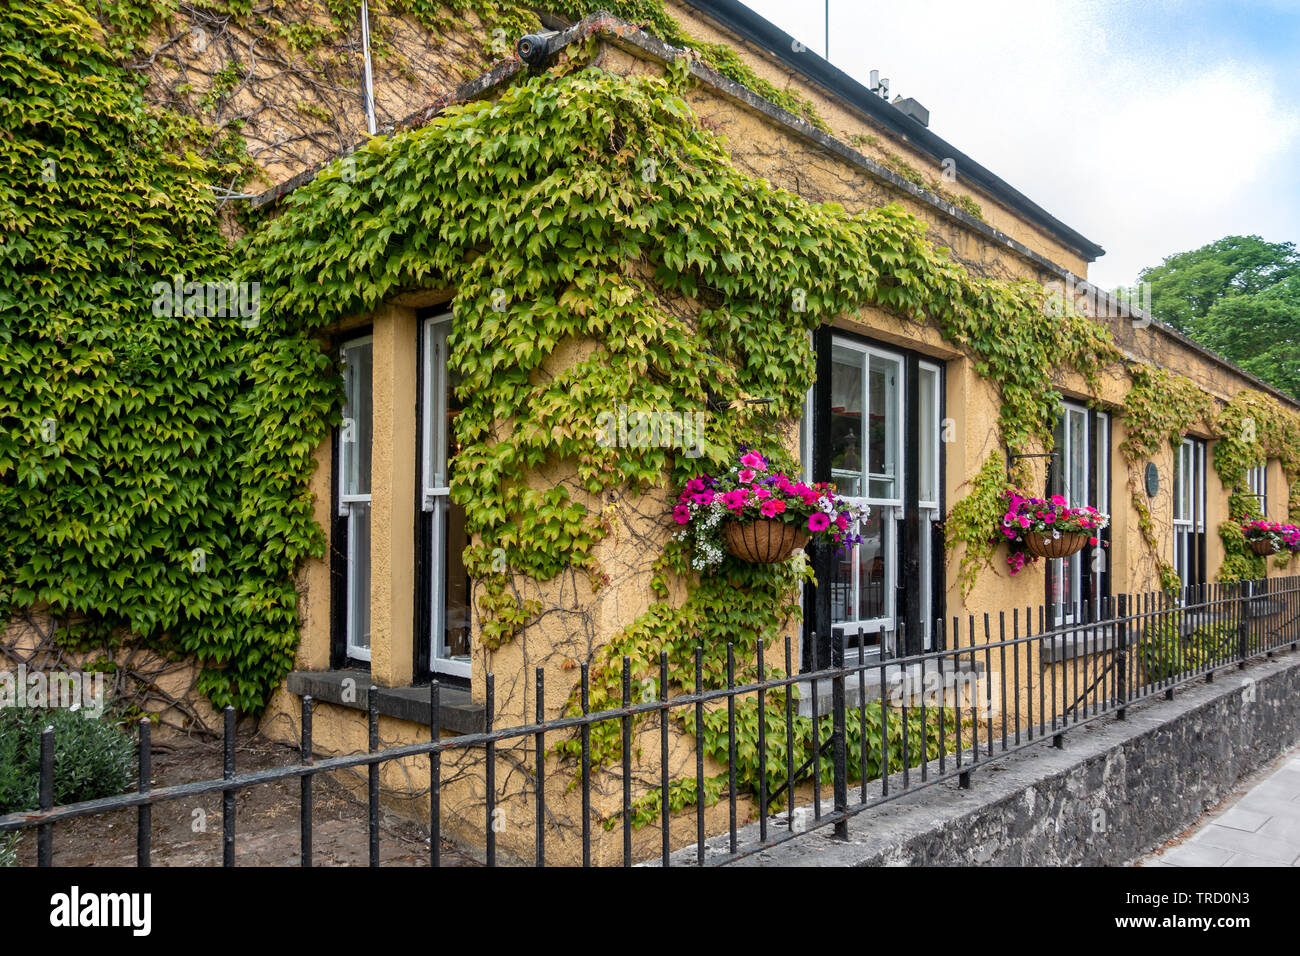 Dunraven Arms Hotel in Adare, Ireland - Considered One of Ireland's Prettiest Towns Stock Photo